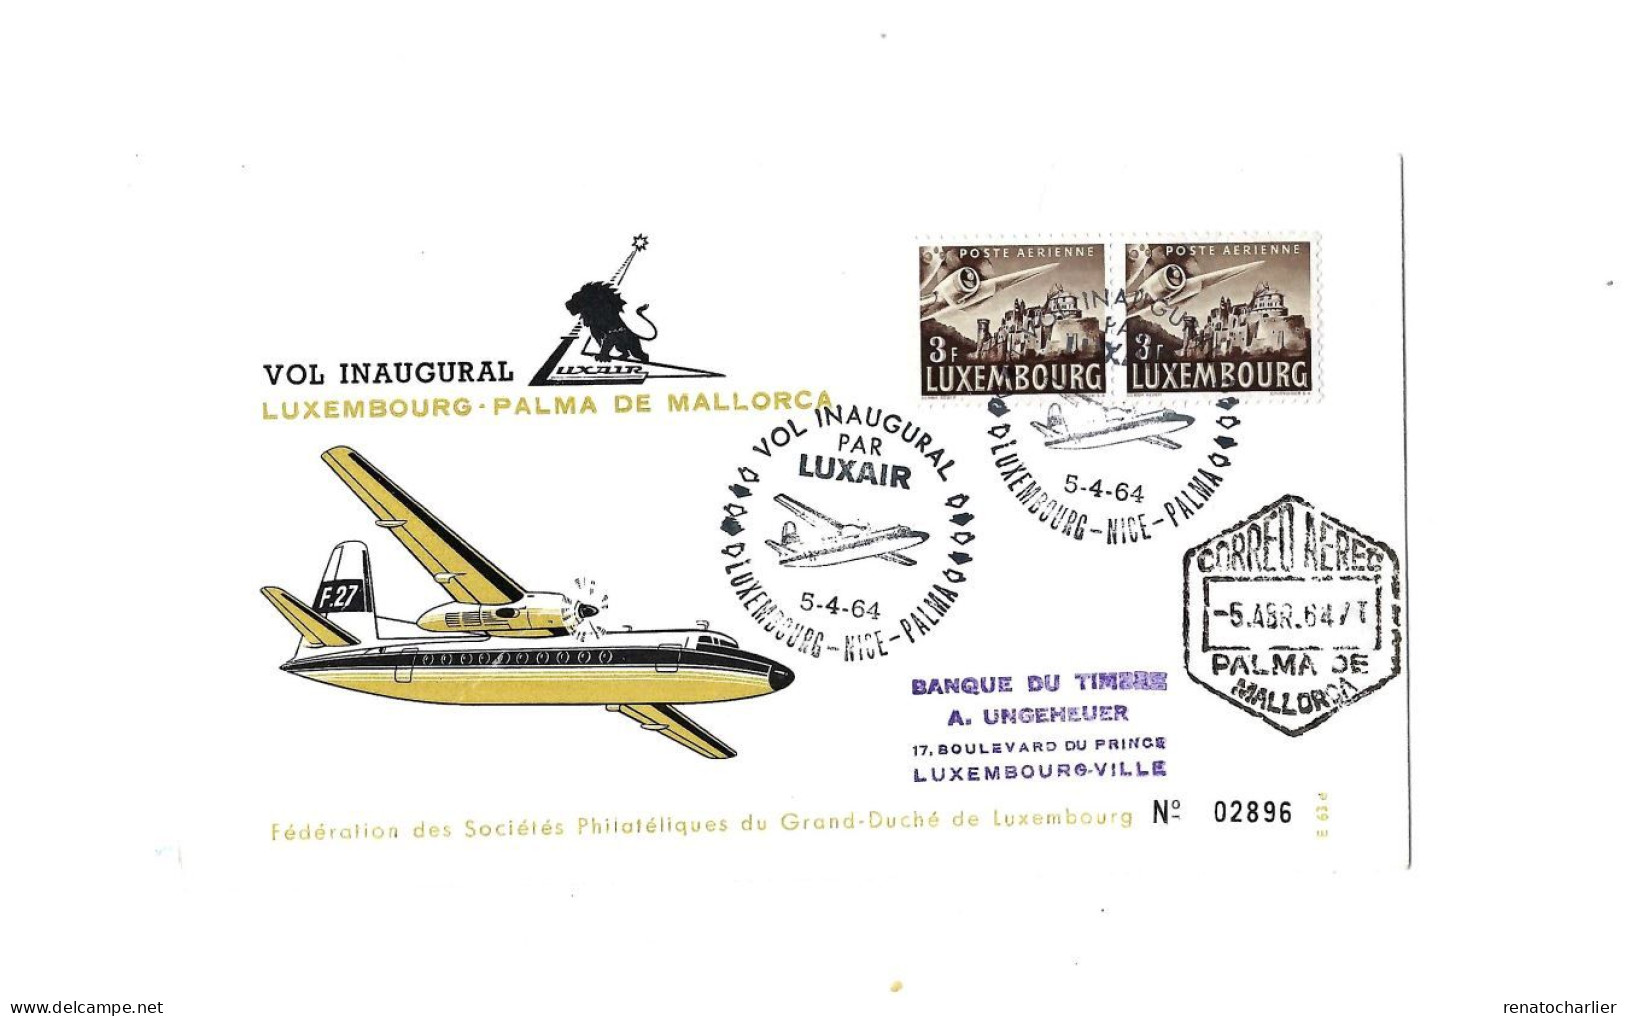 Vol Inaugural Luxembourg-Palma De Mallorca.Luxair.1964. - Covers & Documents